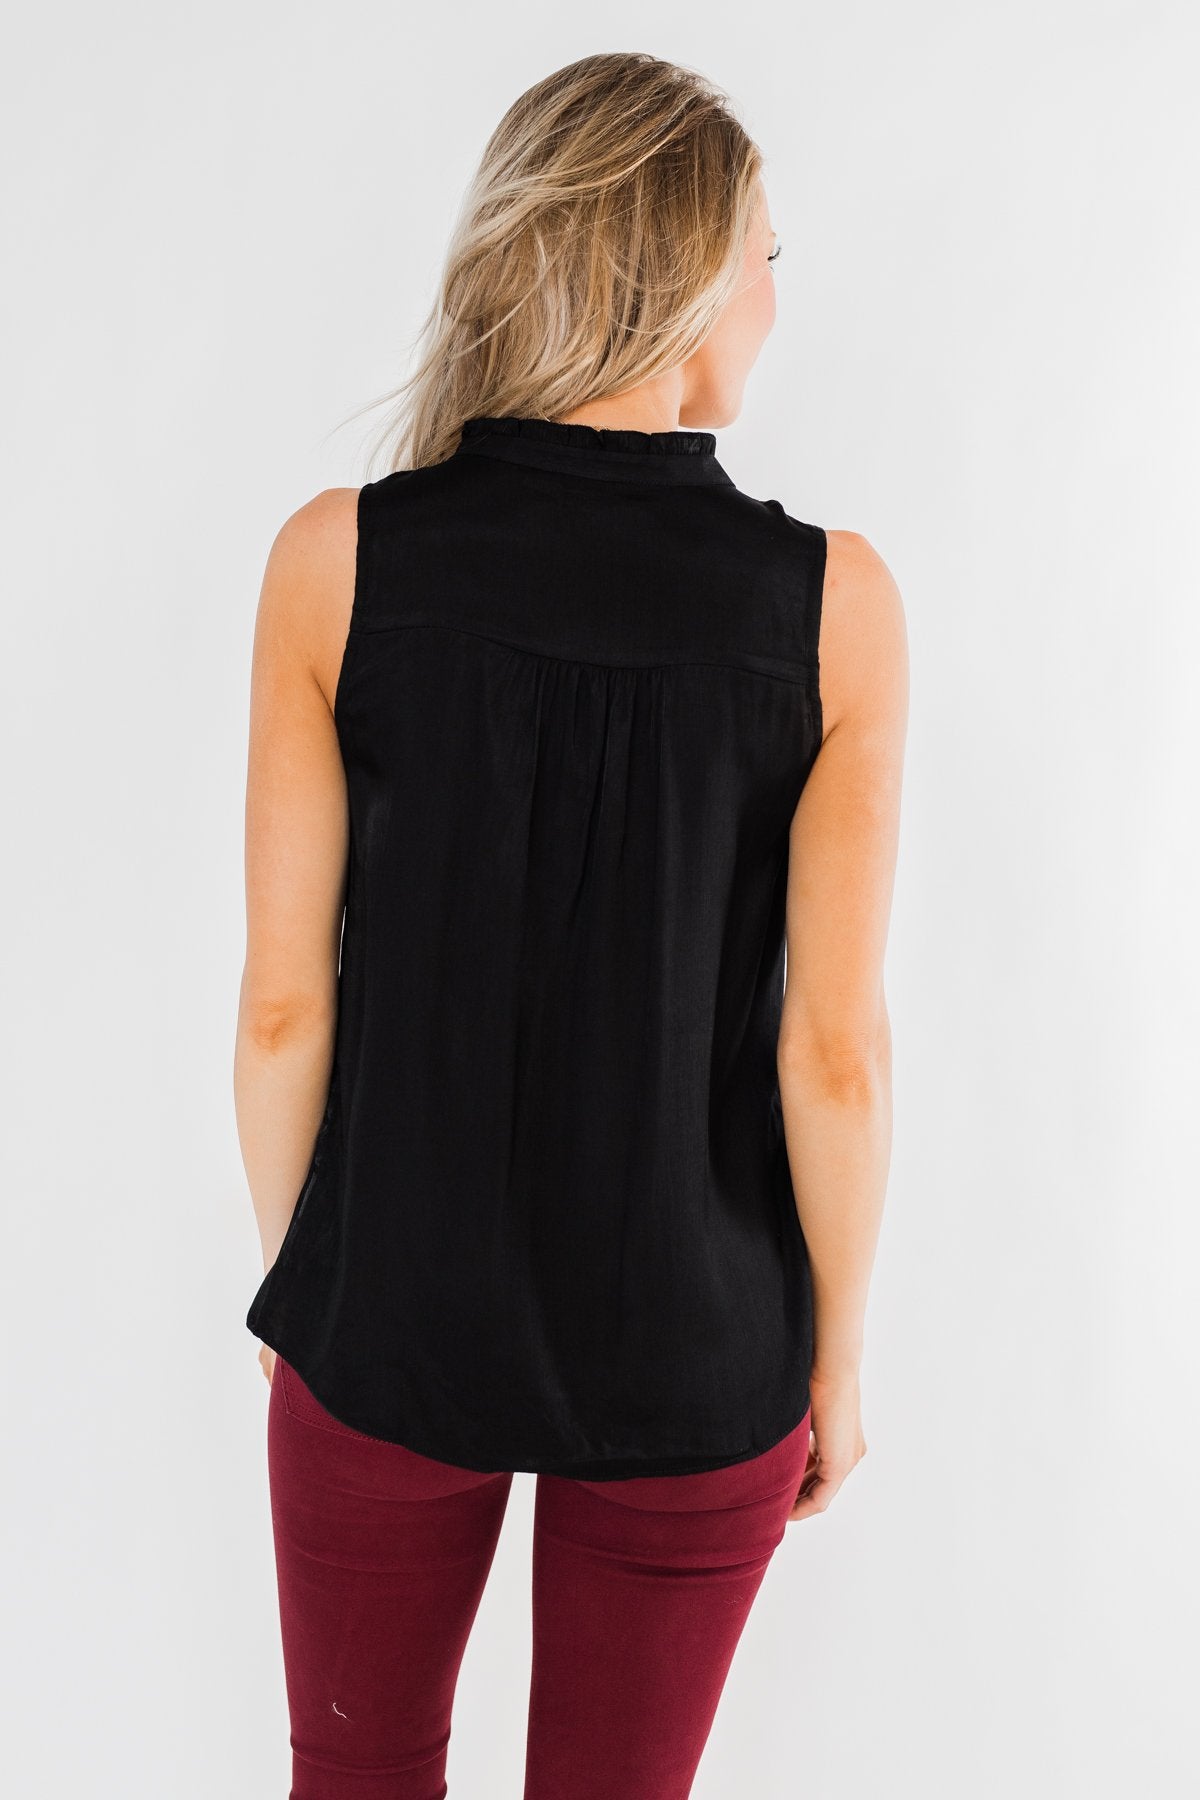 Always Had A Feeling Ruffled Tank Top- Black – The Pulse Boutique